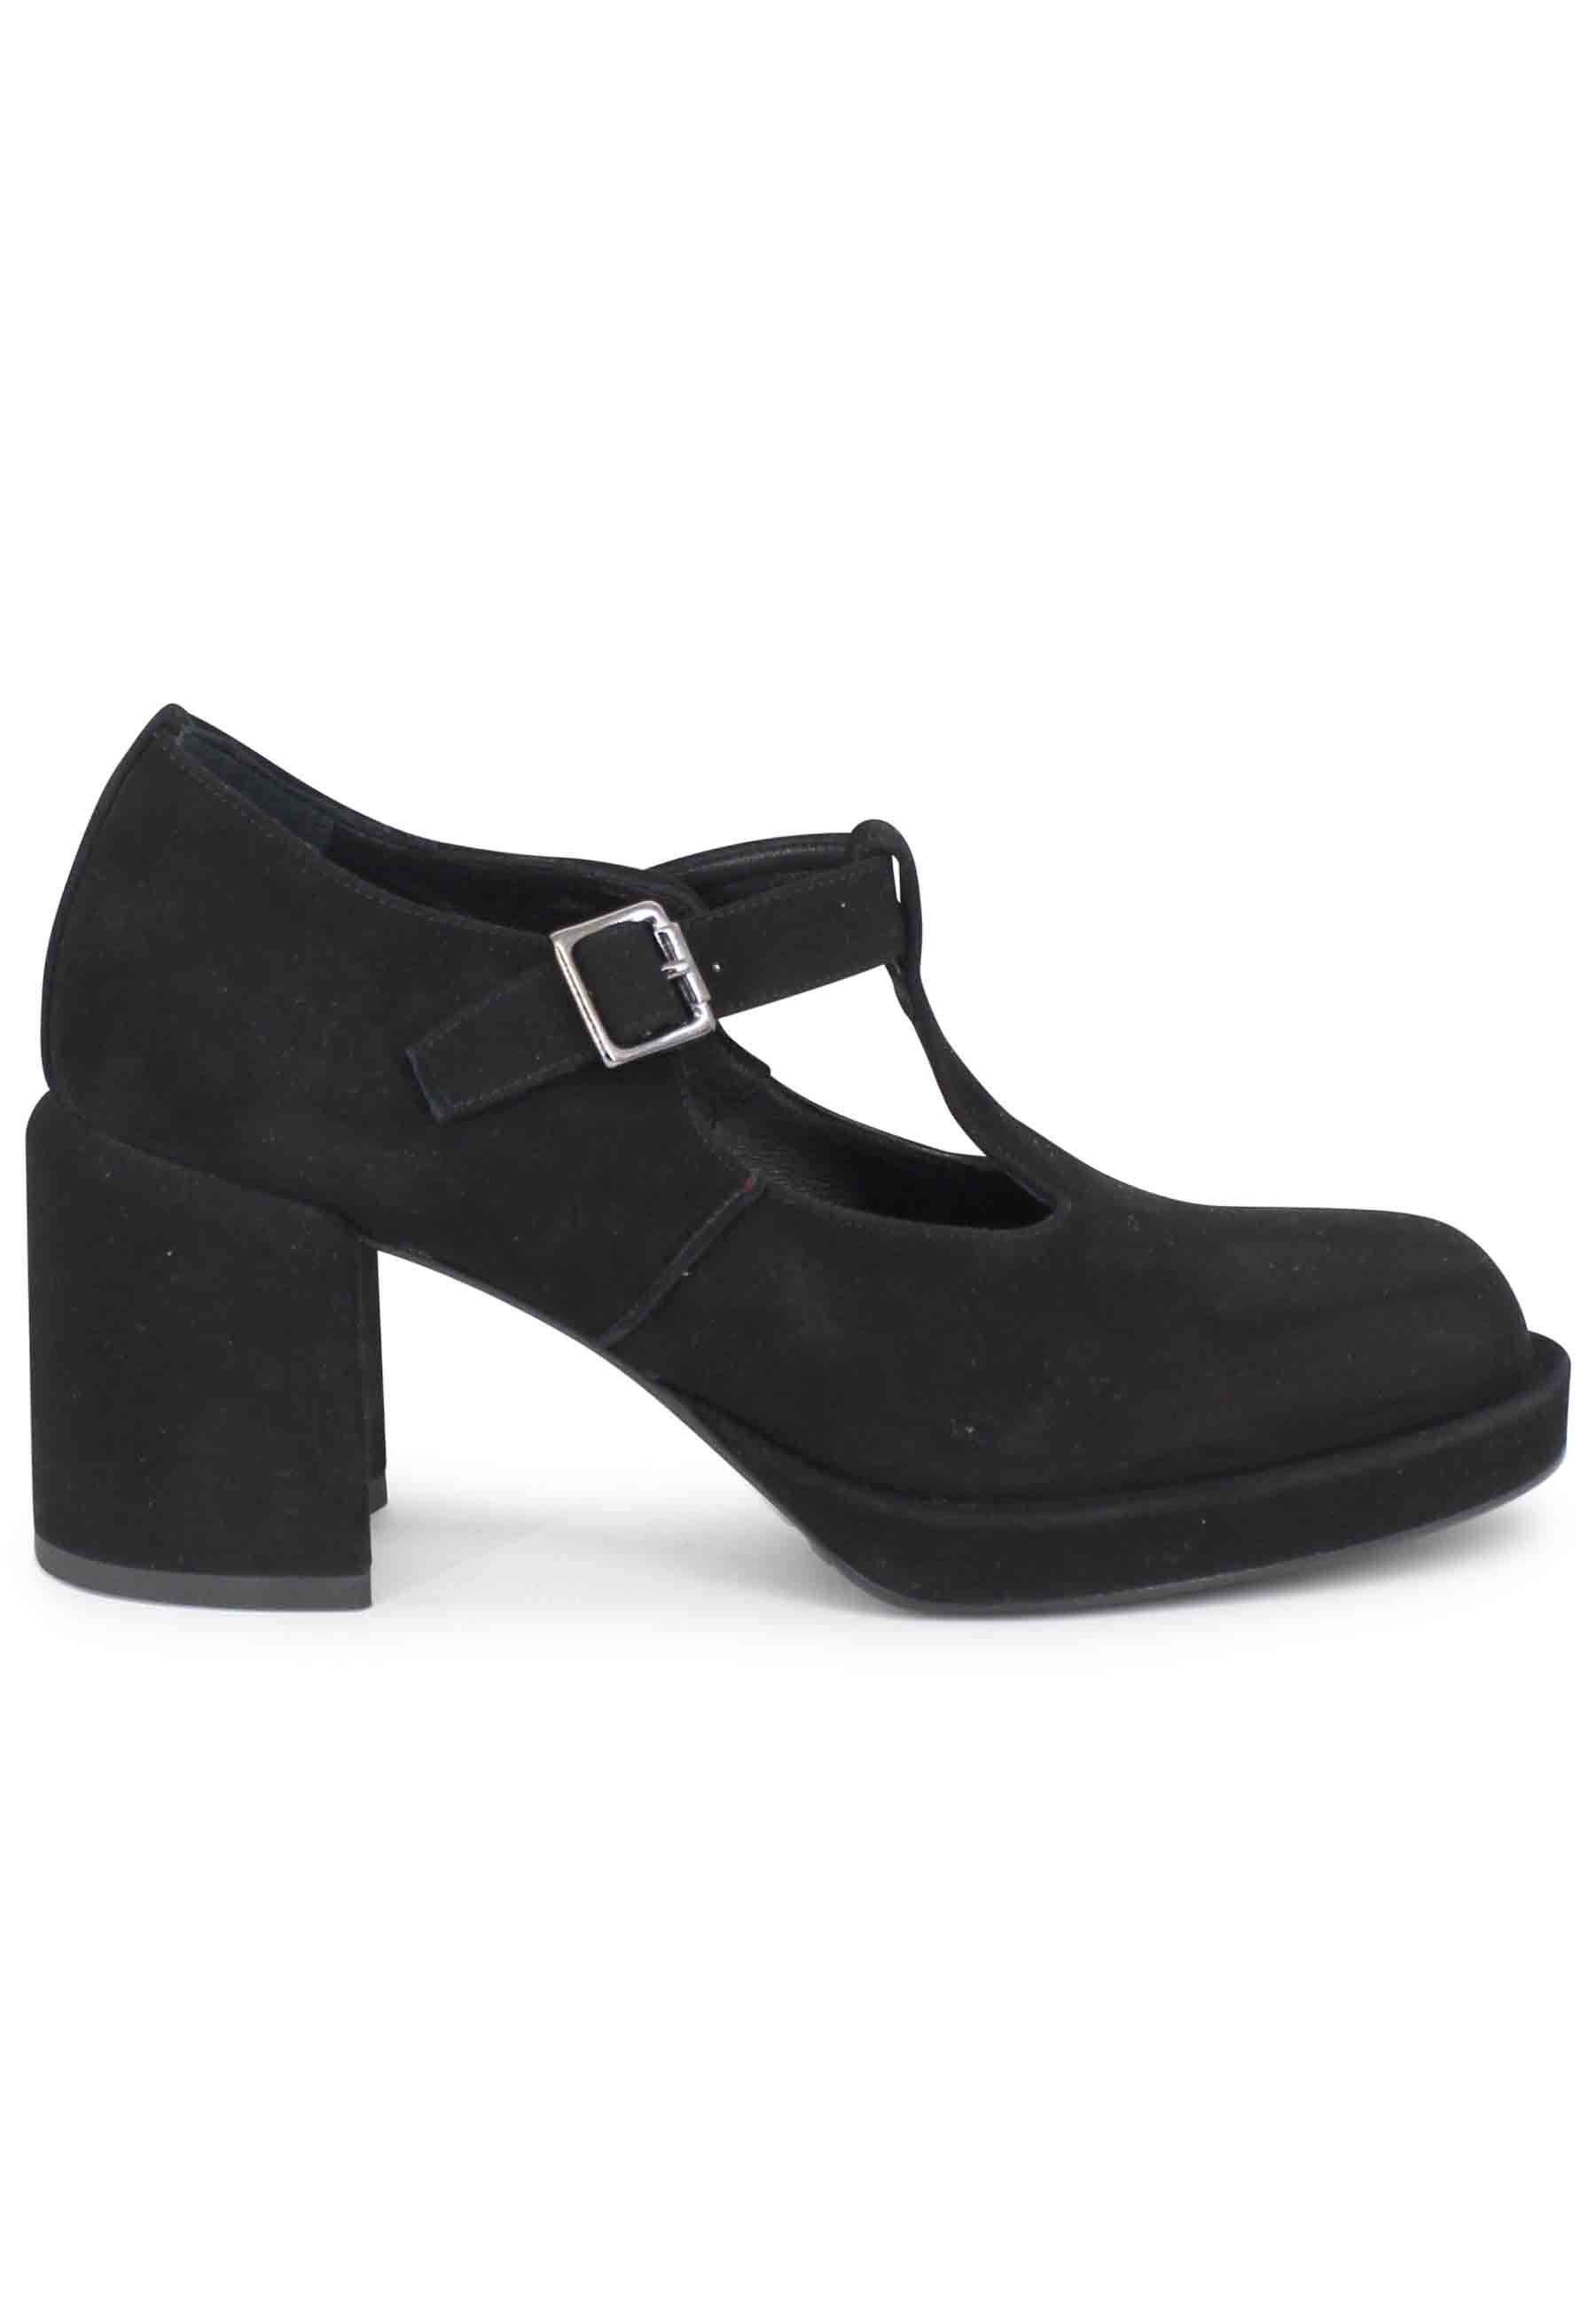 Women's decollete in black suede with heel and plateau